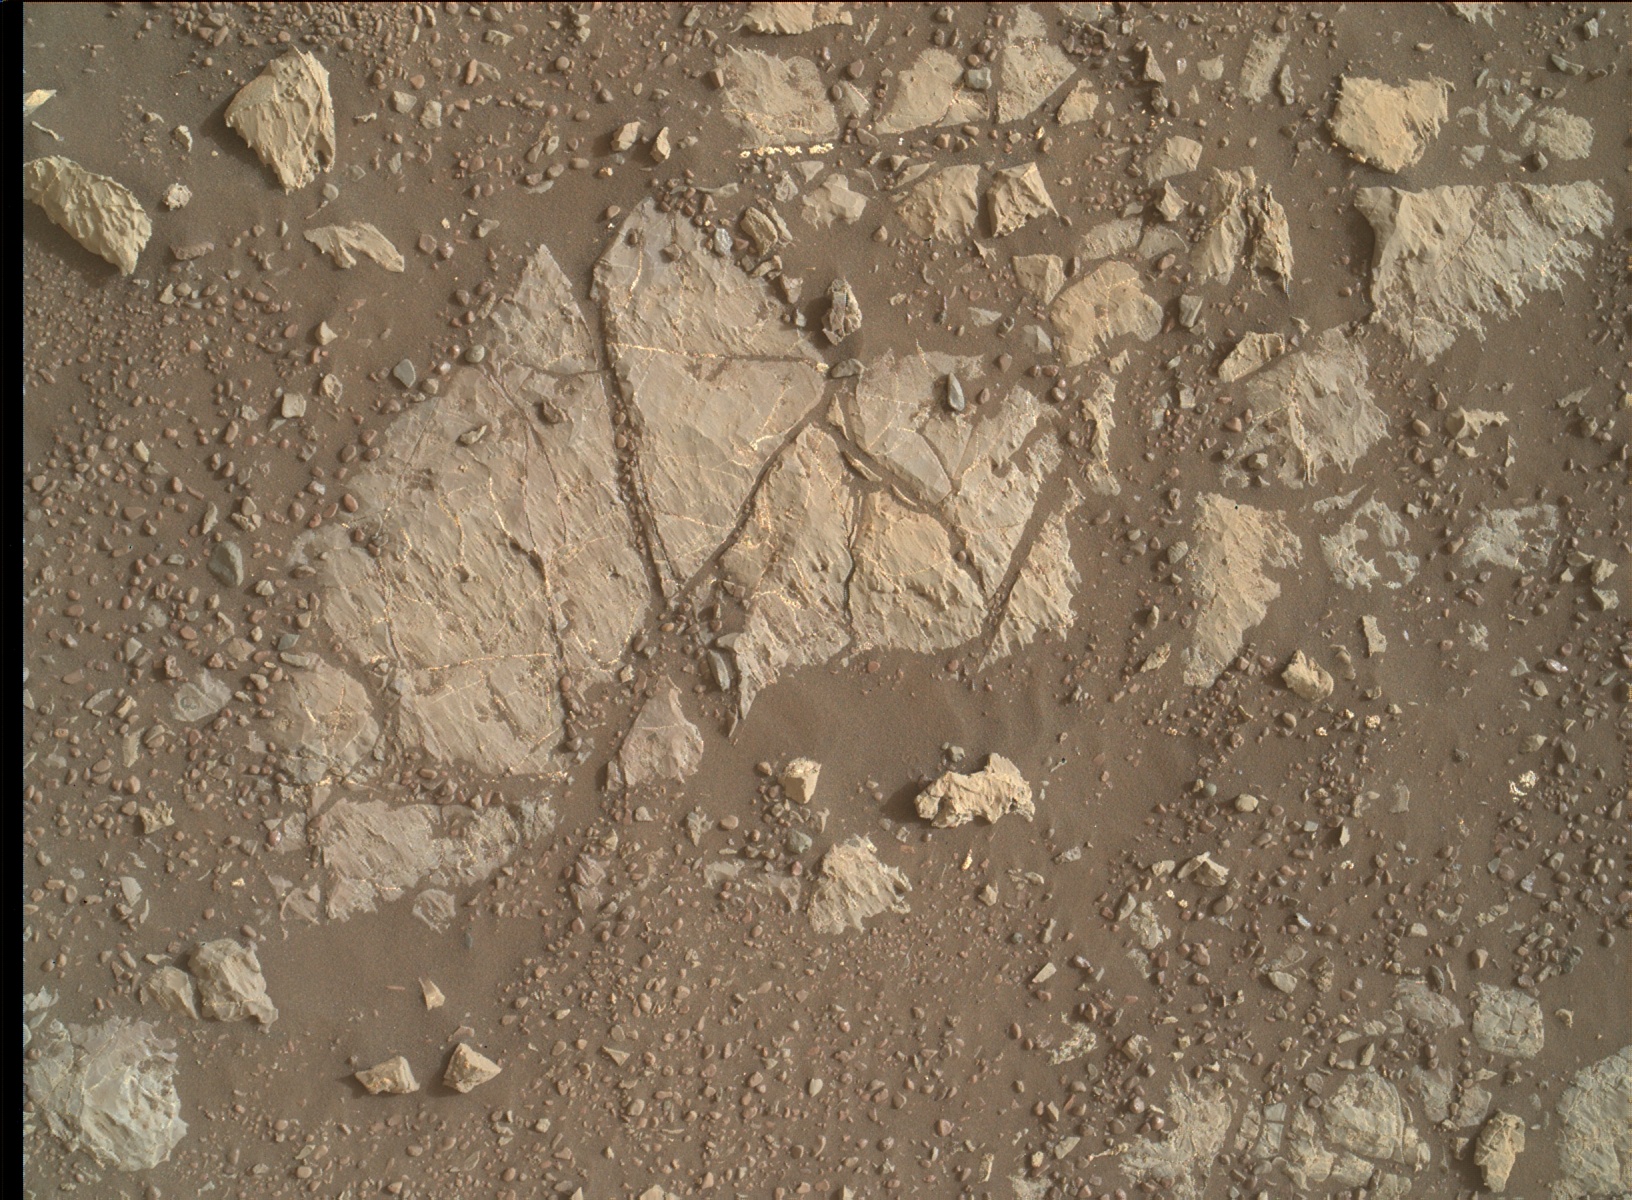 Nasa's Mars rover Curiosity acquired this image using its Mars Hand Lens Imager (MAHLI) on Sol 2216